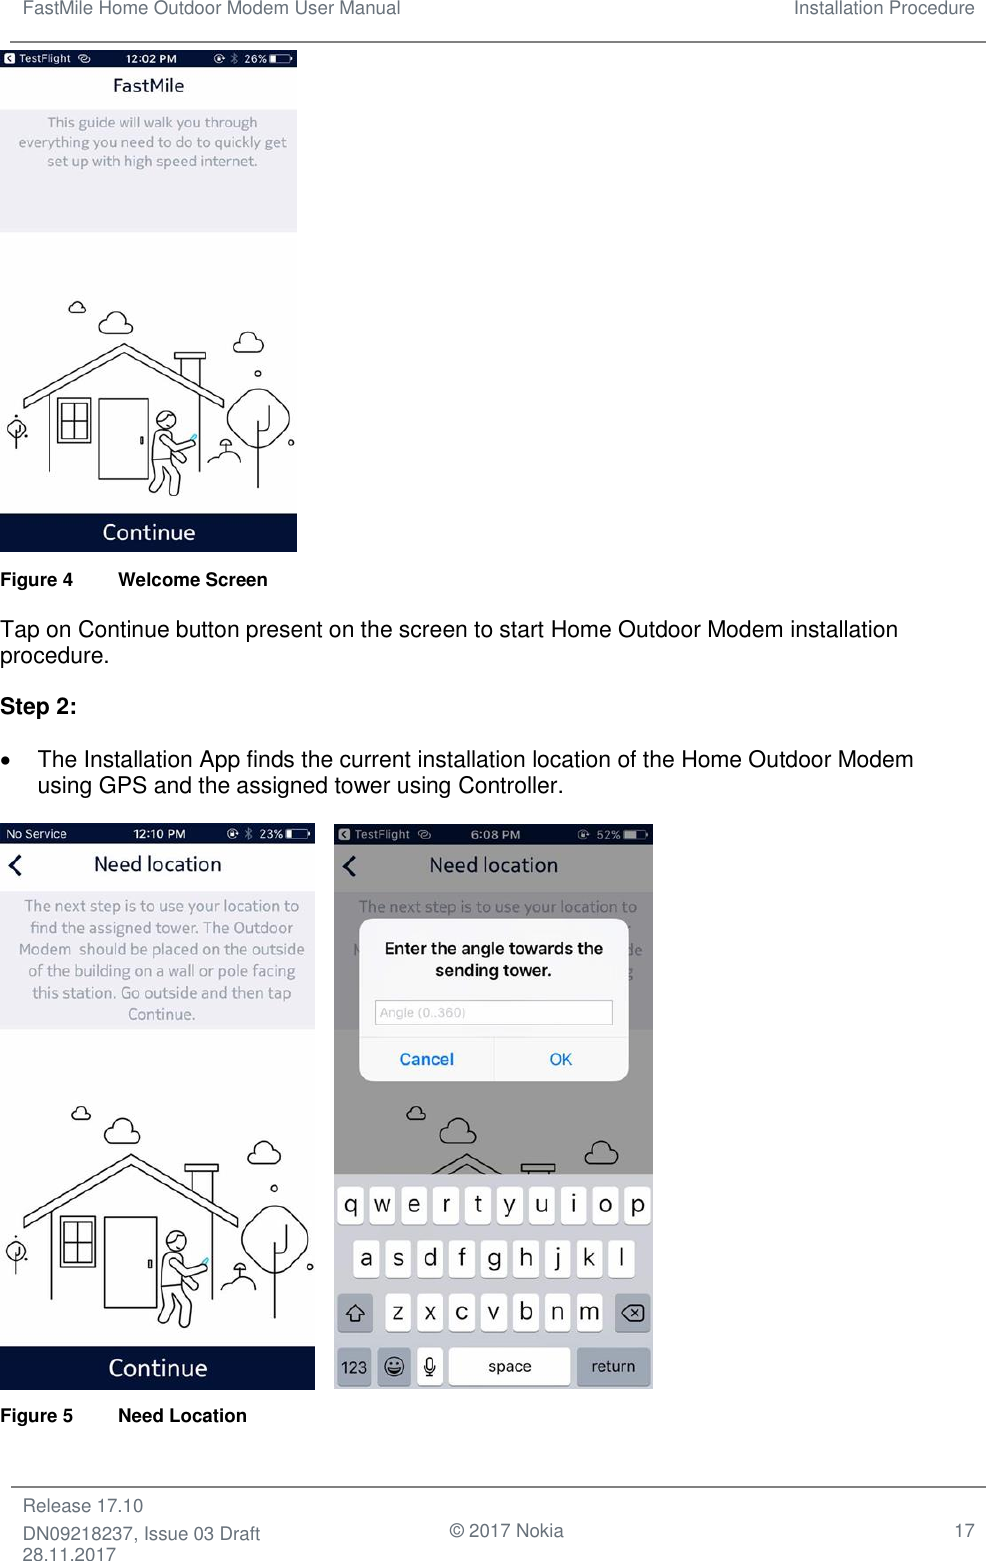 FastMile Home Outdoor Modem User Manual Installation Procedure  Release 17.10 DN09218237, Issue 03 Draft 28.11.2017                                © 2017 Nokia 17   Figure 4  Welcome Screen  Tap on Continue button present on the screen to start Home Outdoor Modem installation procedure. Step 2:  •  The Installation App finds the current installation location of the Home Outdoor Modem using GPS and the assigned tower using Controller.      Figure 5  Need Location 